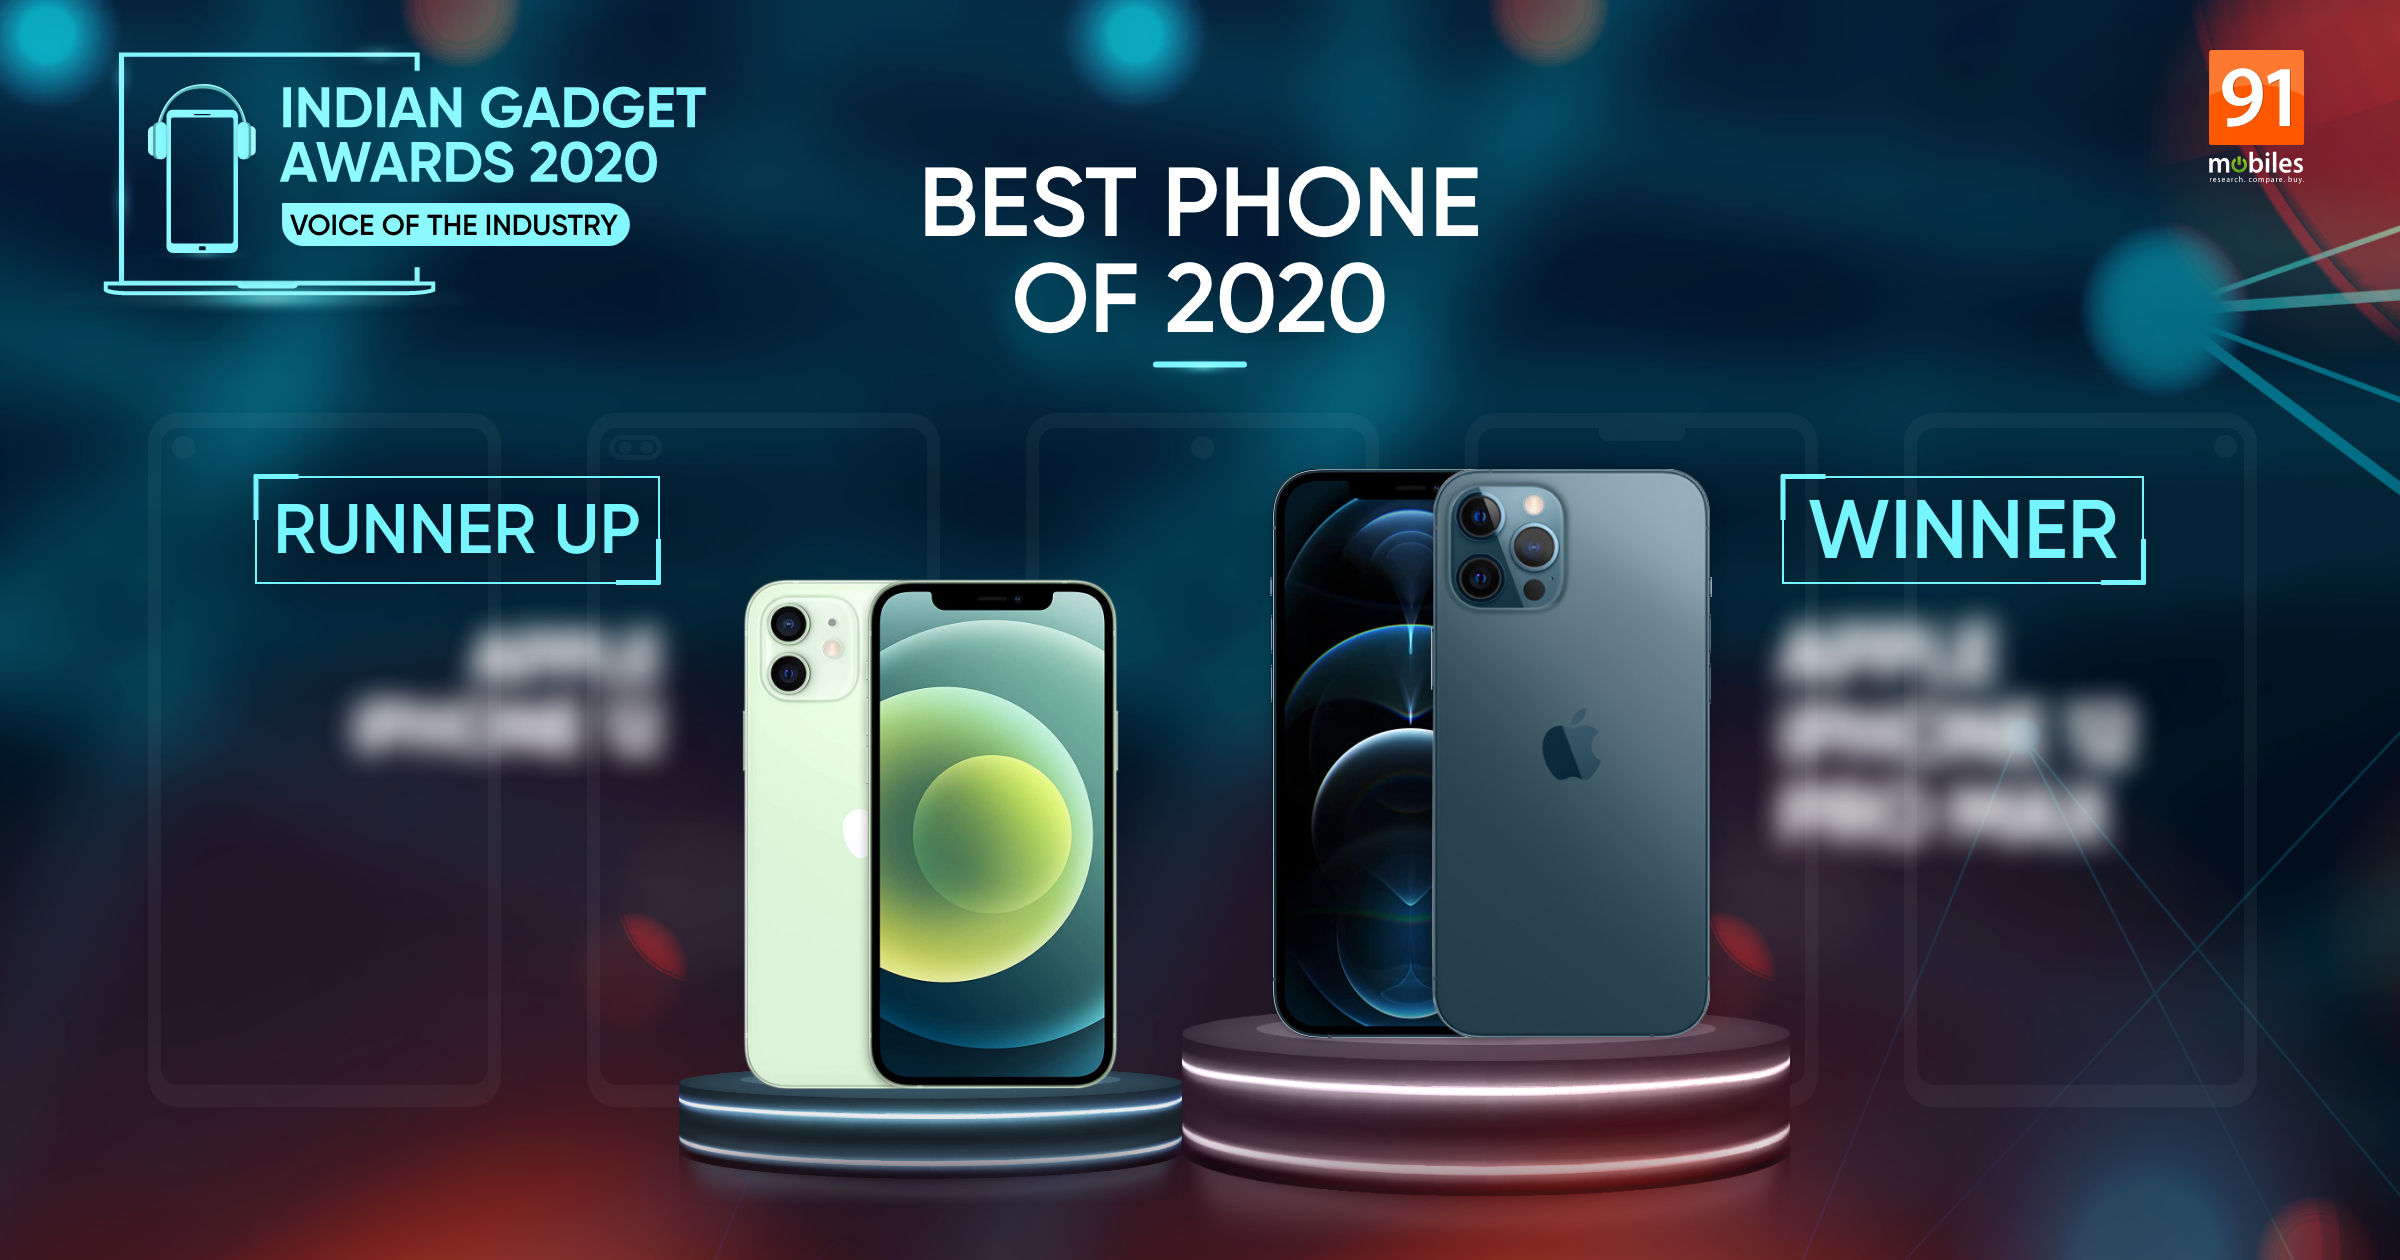 iPhone 12 Pro Max or Samsung Galaxy Note 20 Ultra, who takes the title of Best Phone of 2020 at the Indian Gadget Awards?